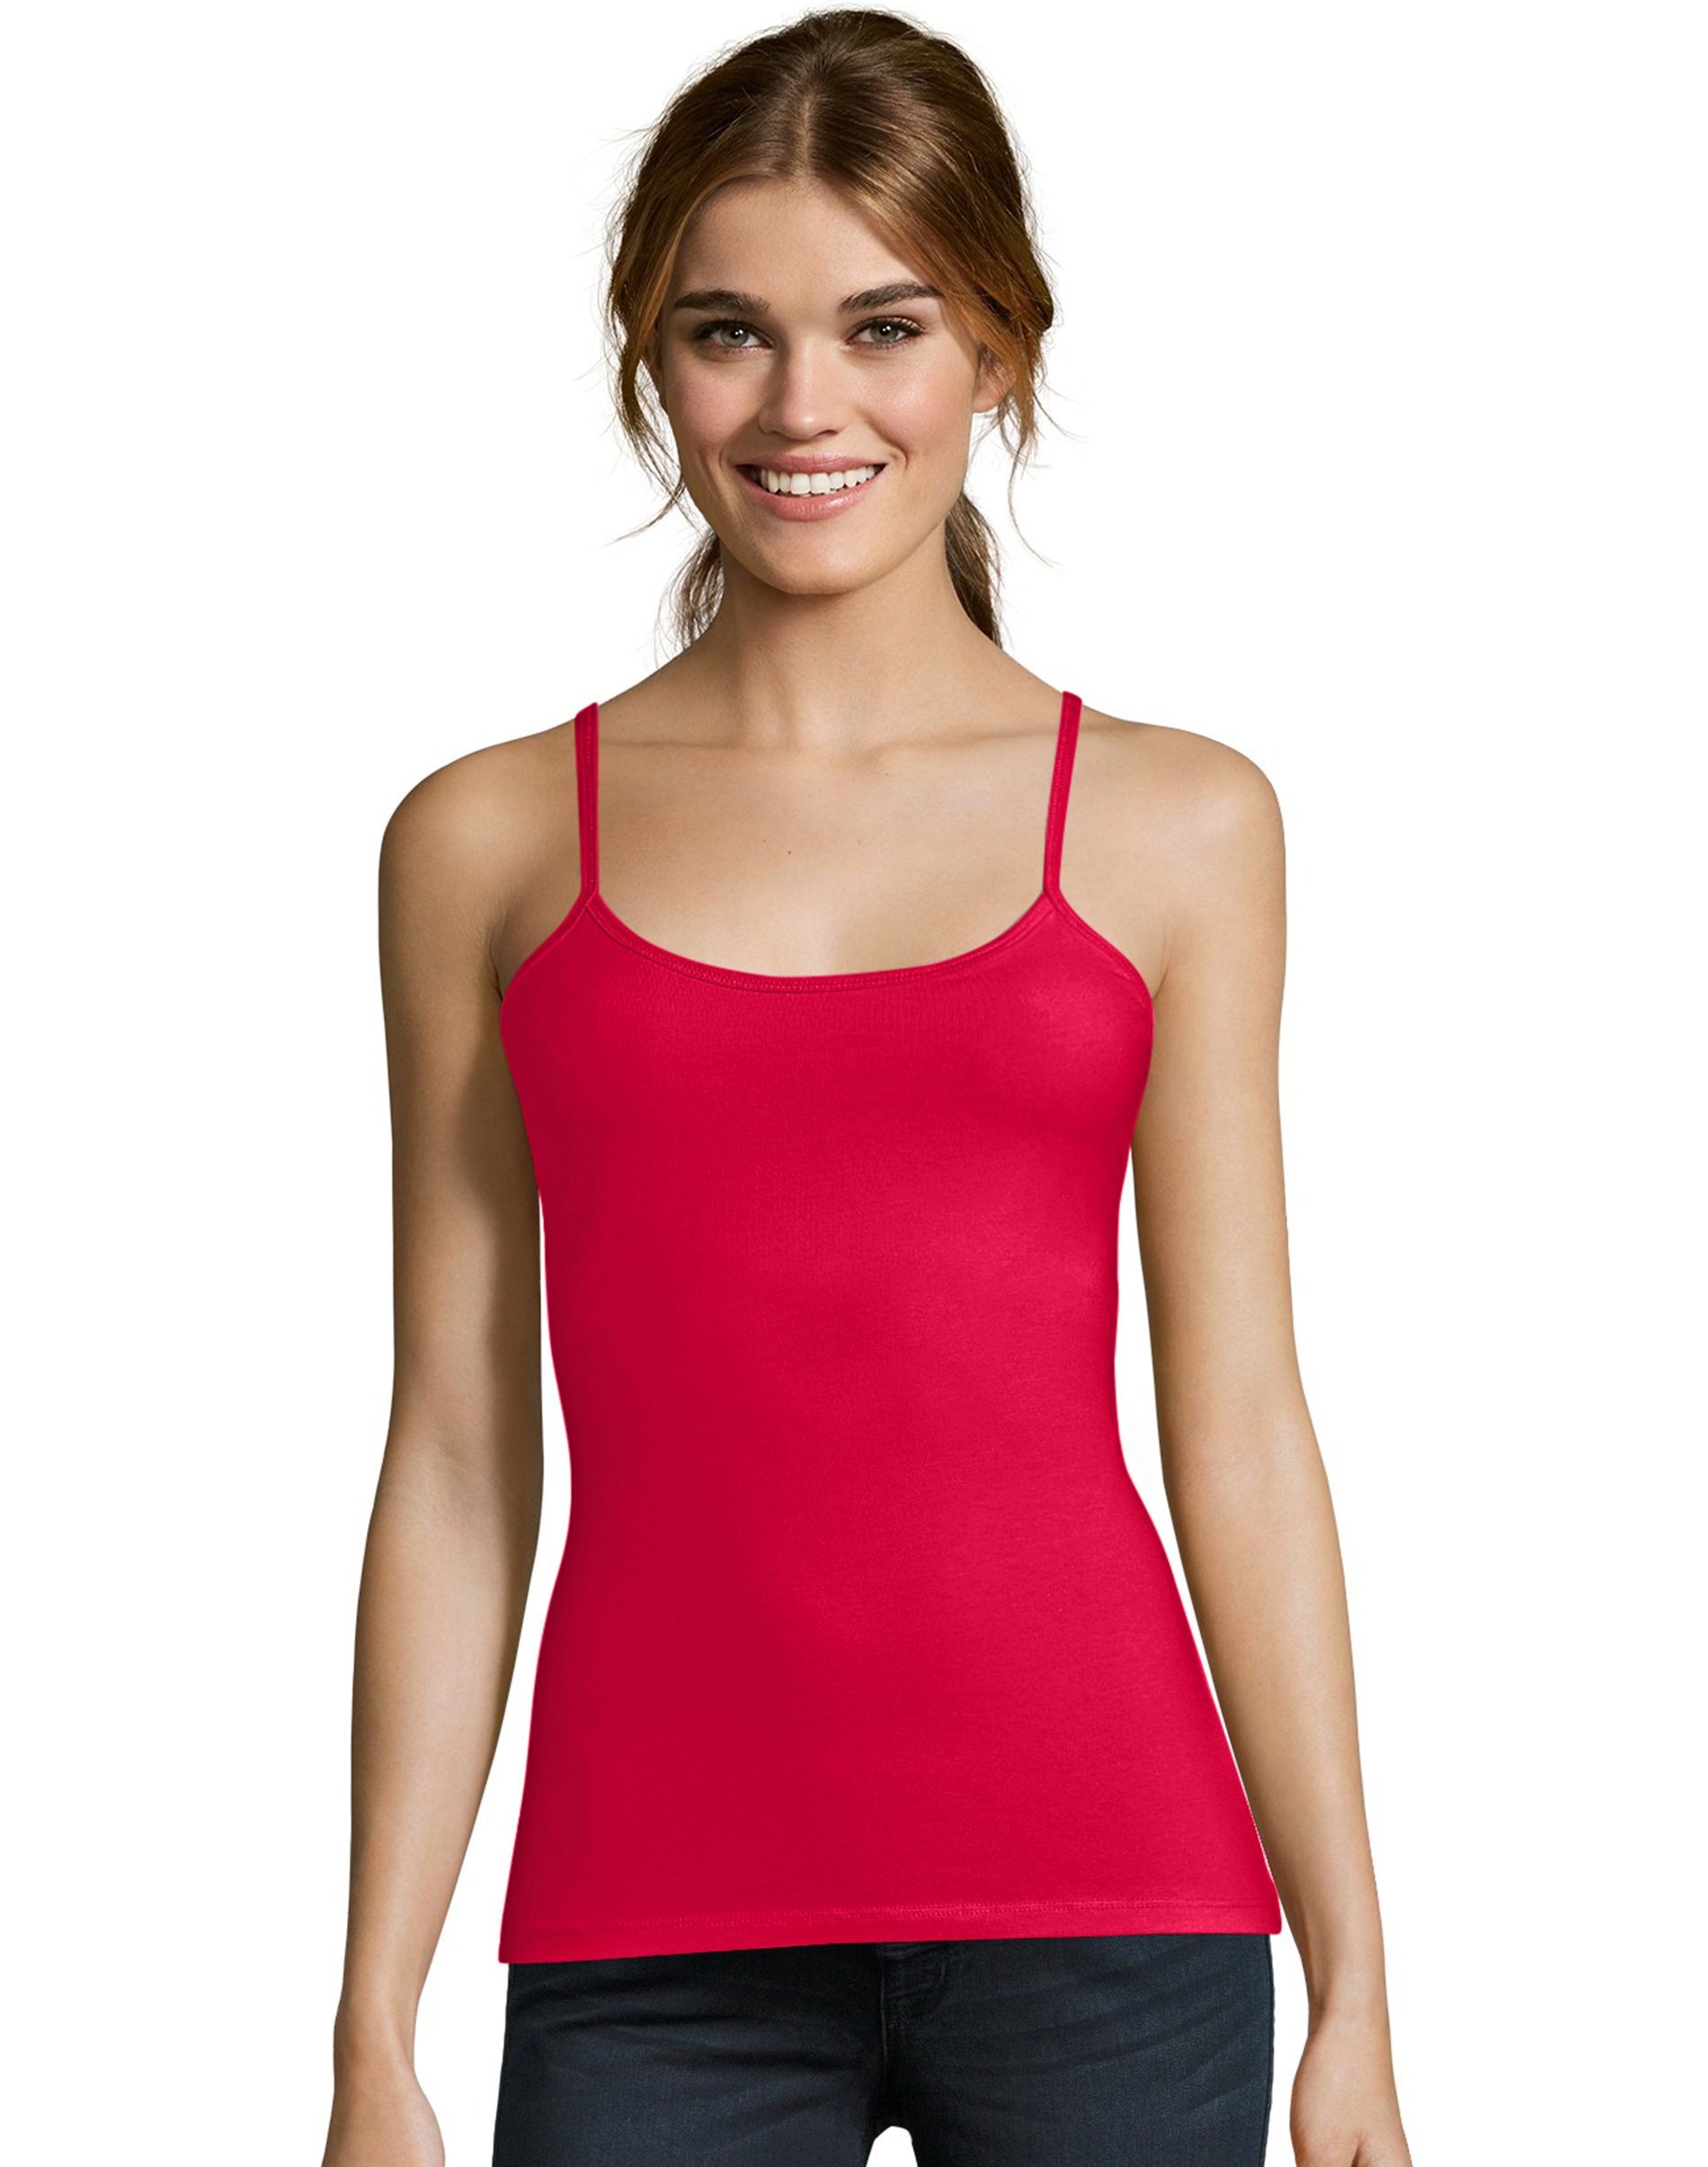 Womens Cotton Camisole Top with Built-in Shelf Bra Stretch